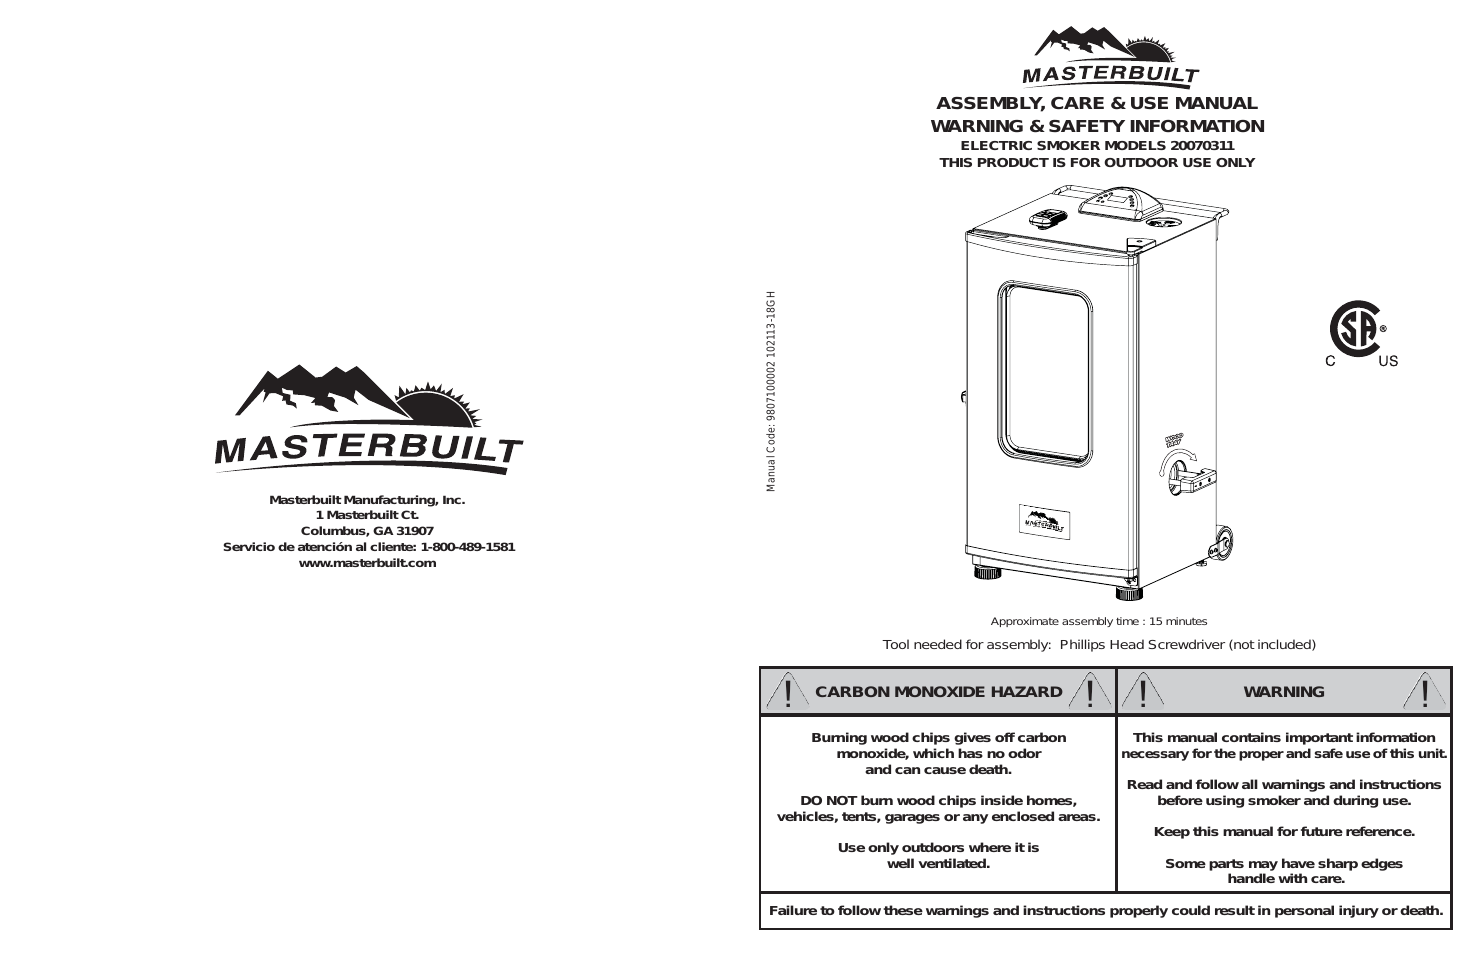 40-inch Electric Digital Stainless Steel Smokehouse (20070311) USER GUIDE